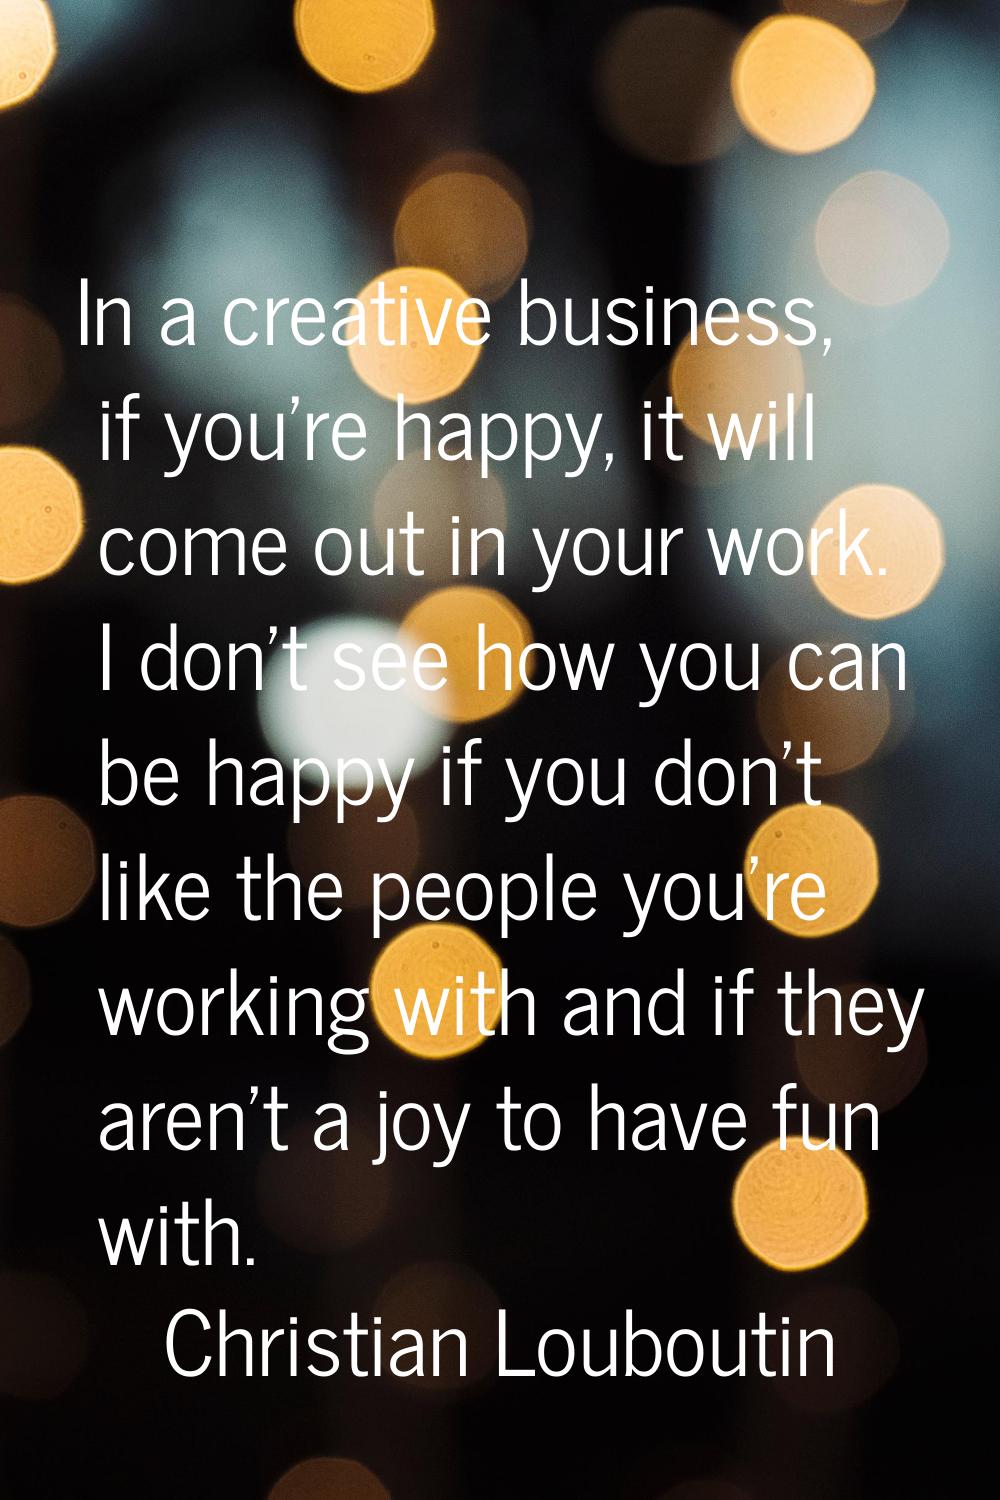 In a creative business, if you're happy, it will come out in your work. I don't see how you can be 